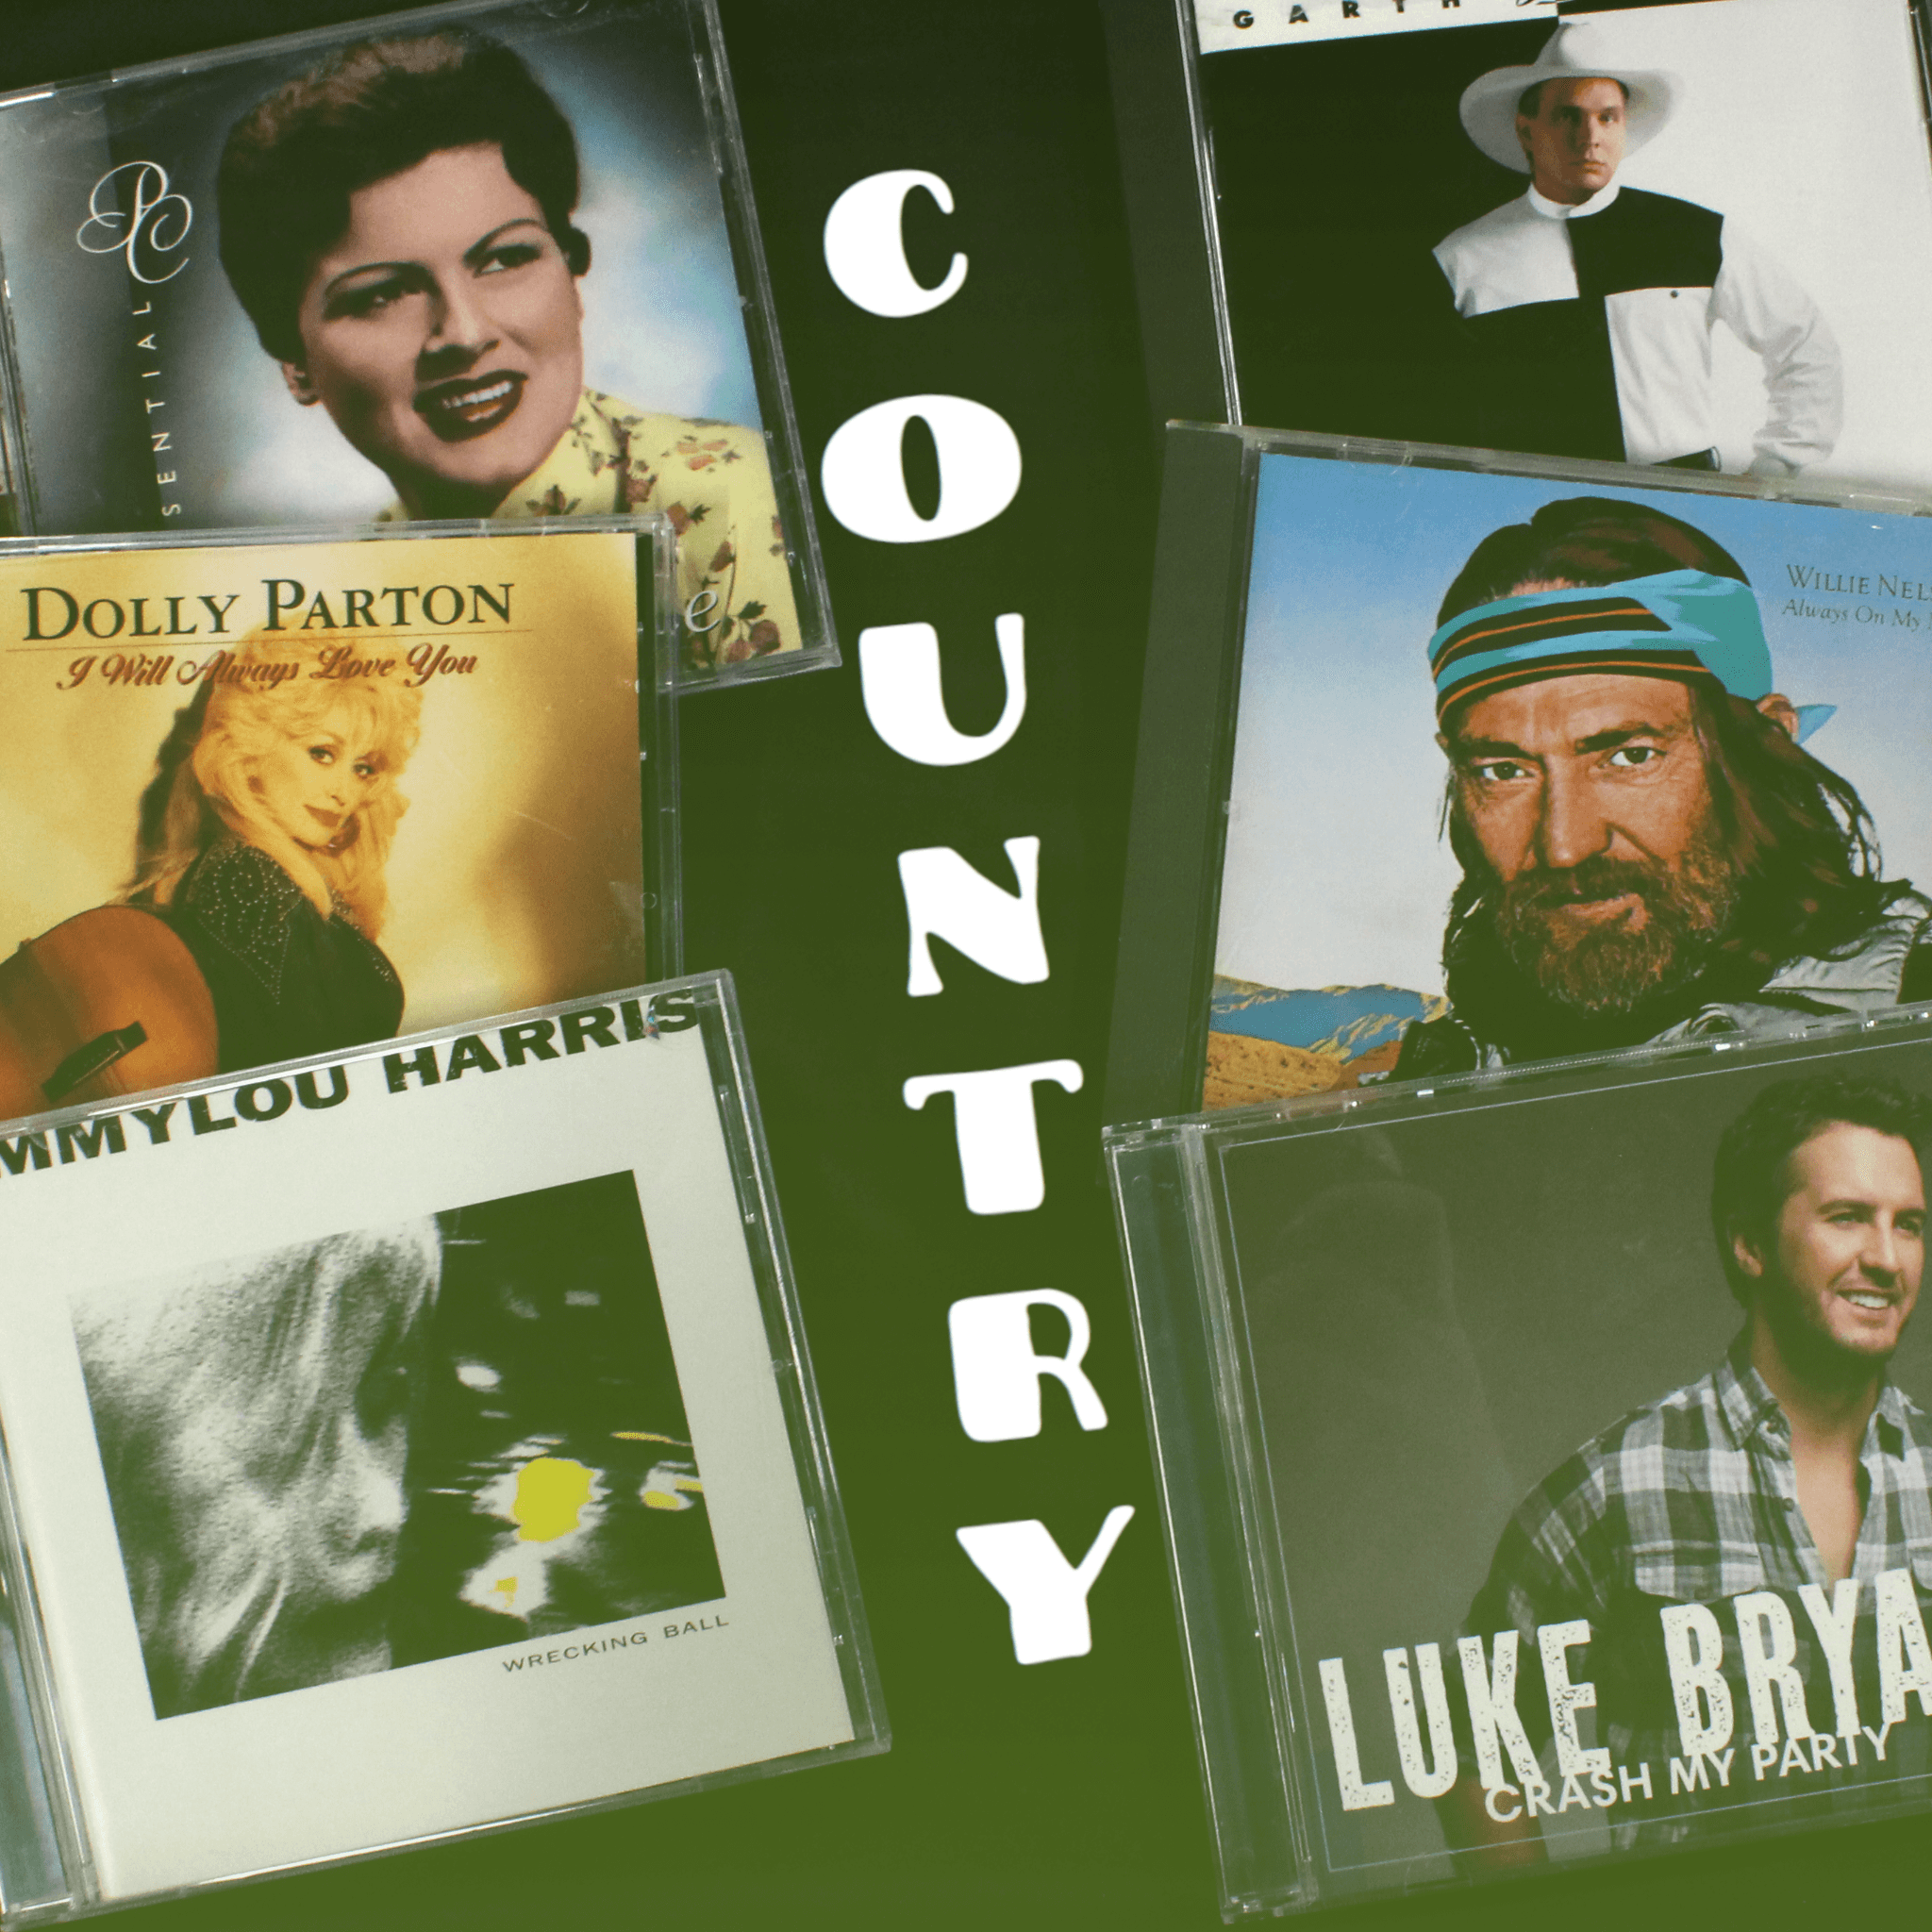 Used CD / Country - Darkside Records